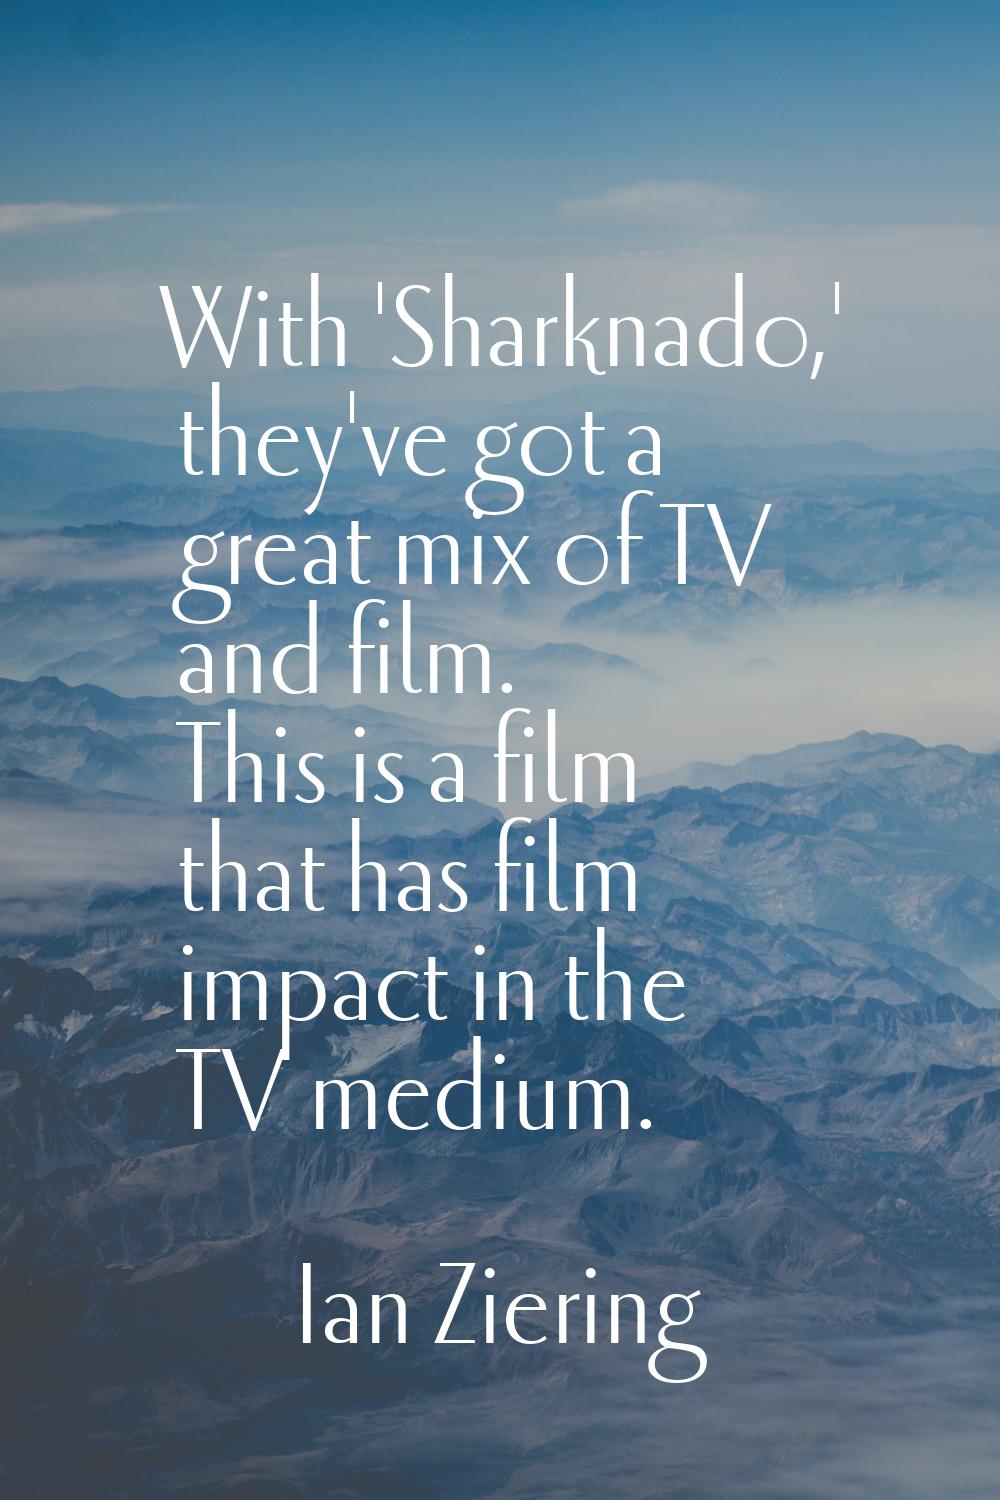 With 'Sharknado,' they've got a great mix of TV and film. This is a film that has film impact in th